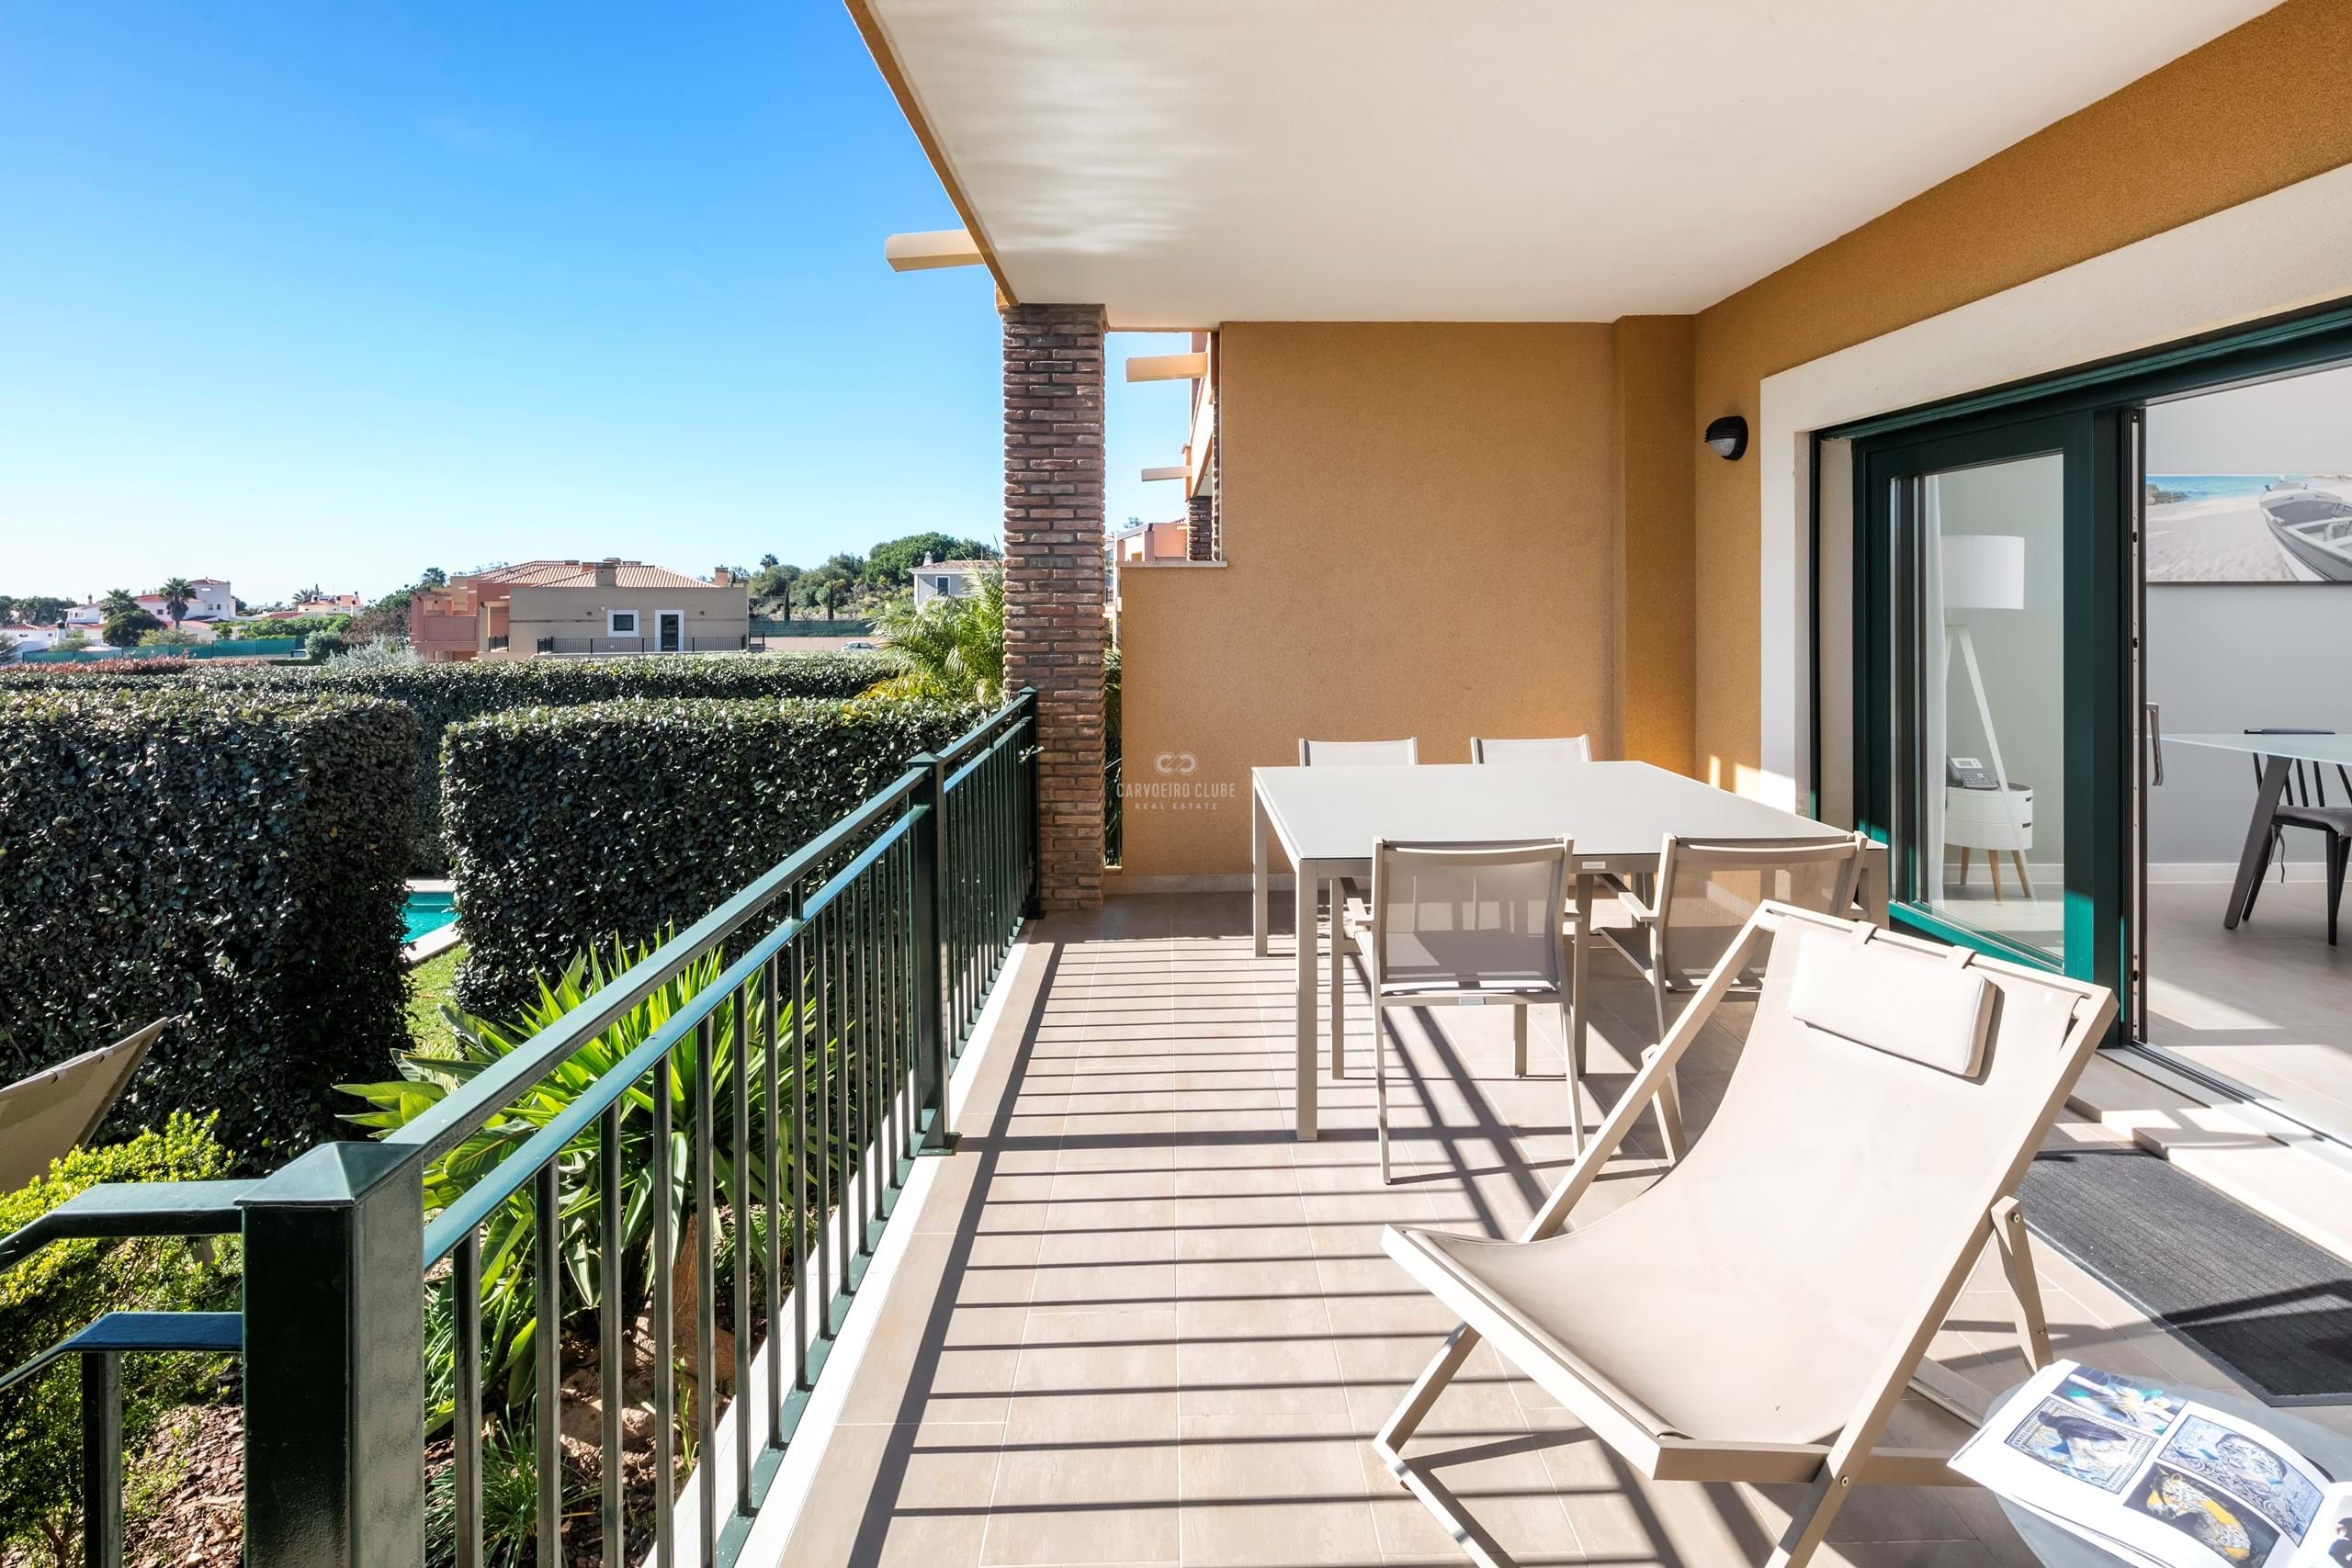 Superb 2+1-bedroom townhouse with private pool and garden